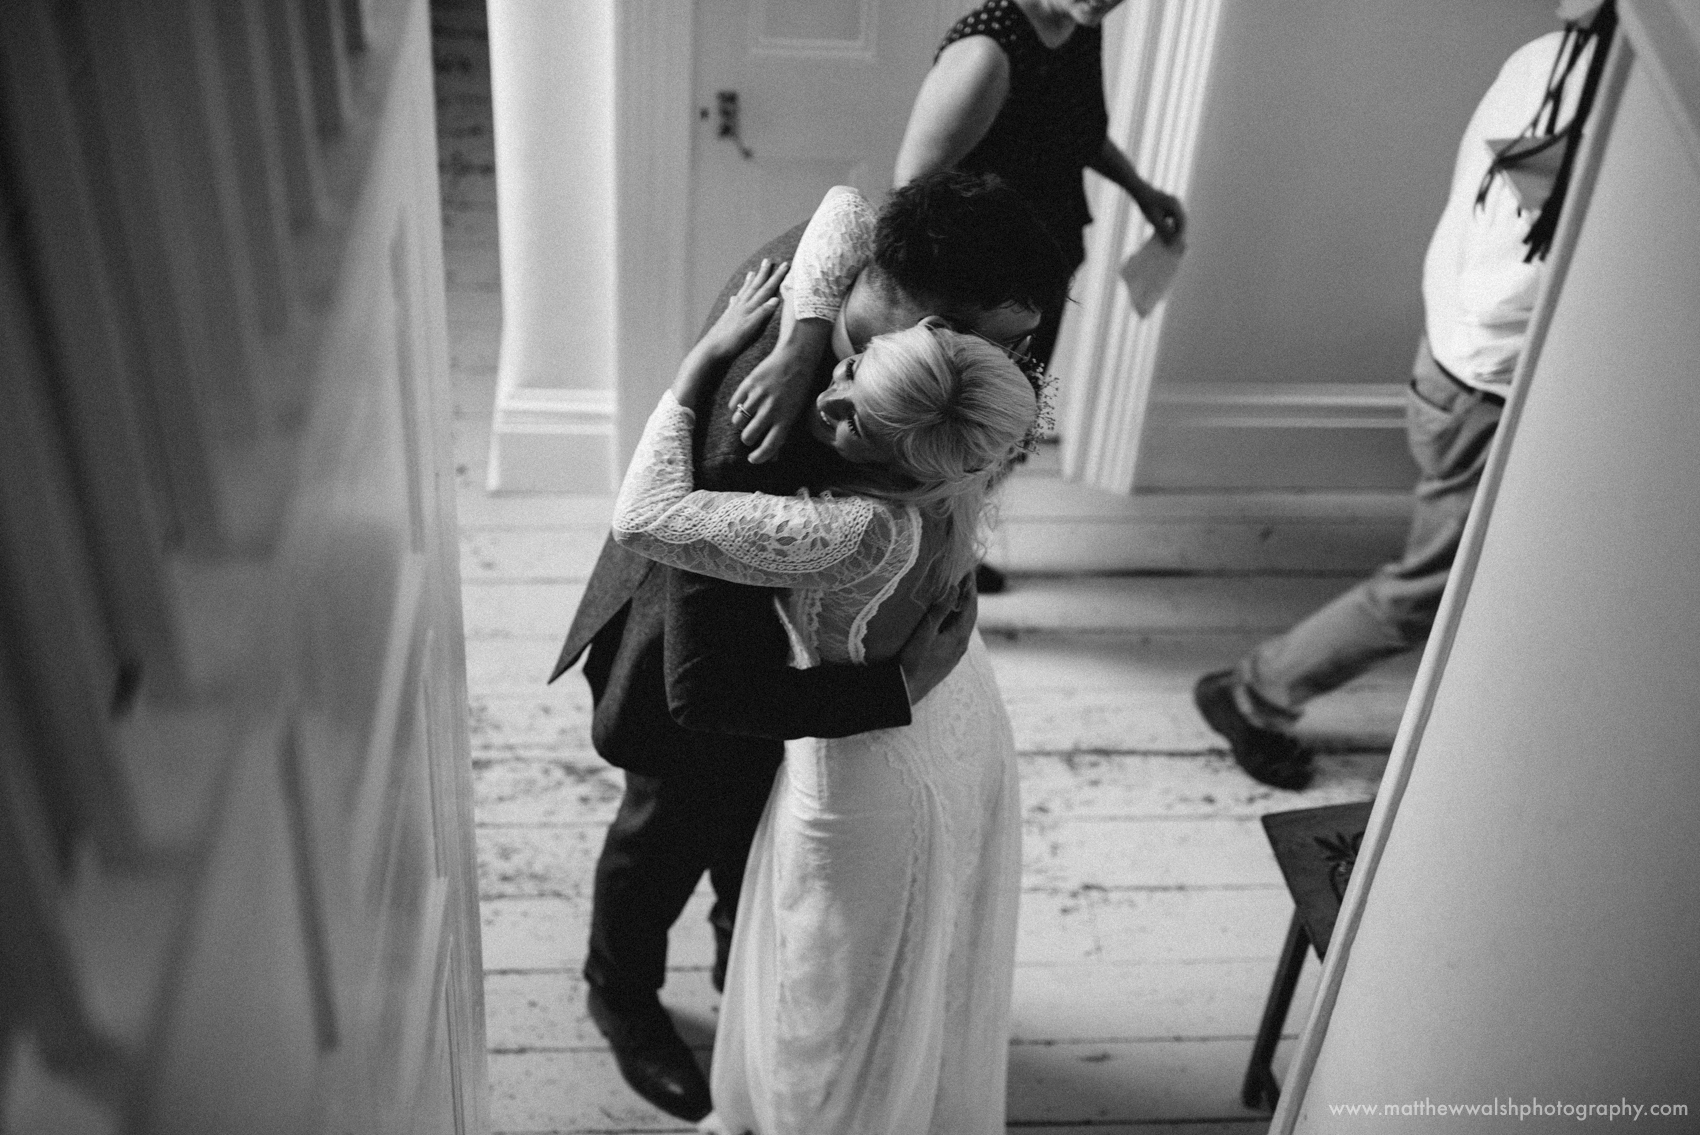 A warm embrace for the bride as her proud brother gives her a loving hug